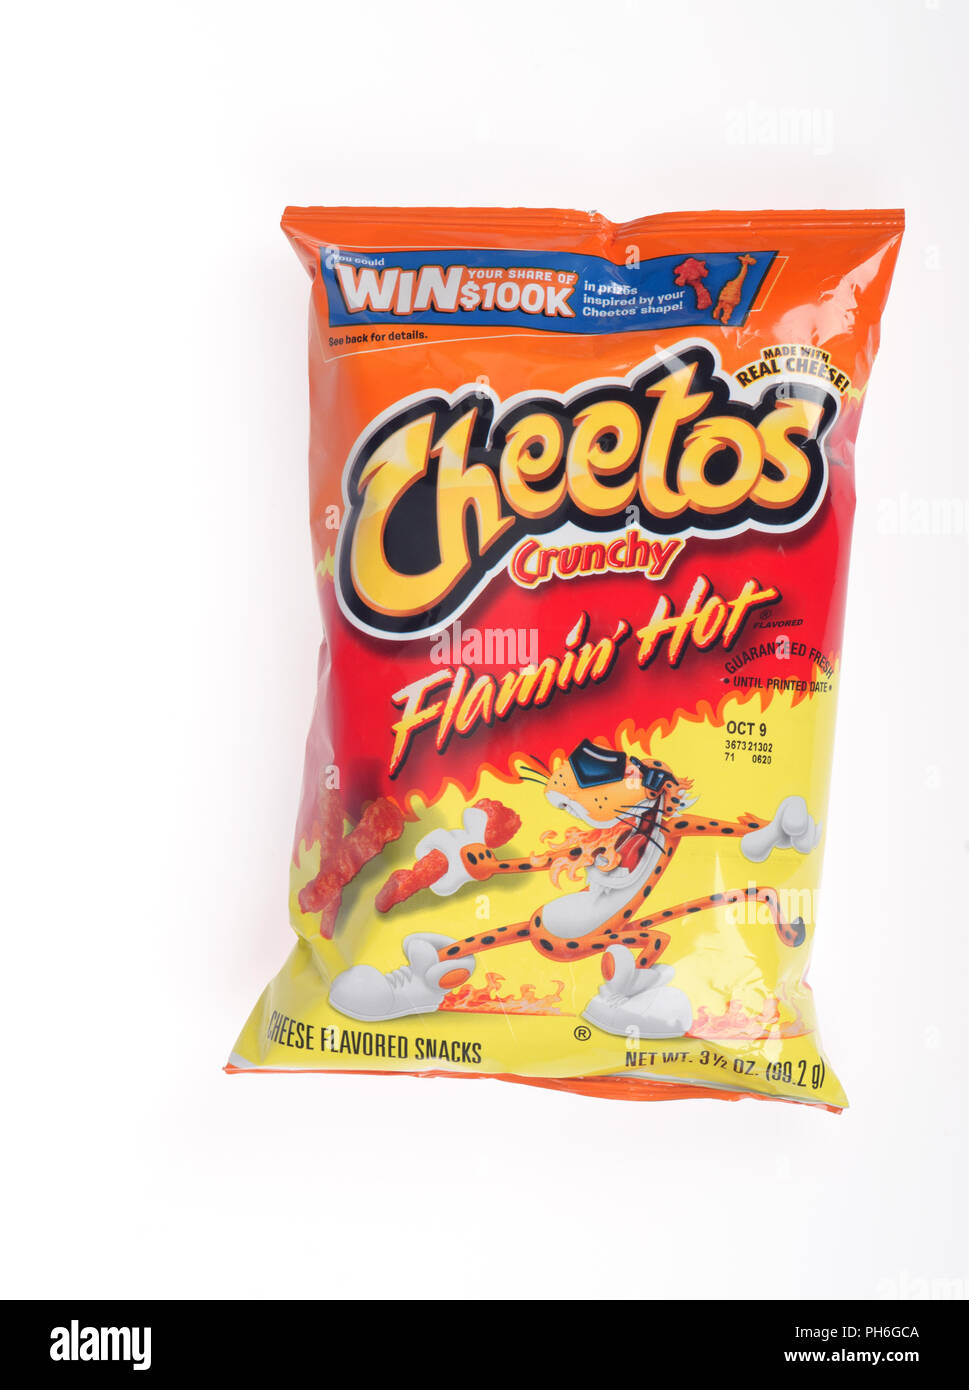 Bag of Cheetos Crunchy Flamin' Hot cheese flavored snacks by Frito Lay company, a subsidiary of PepsiCo on white background Stock Photo